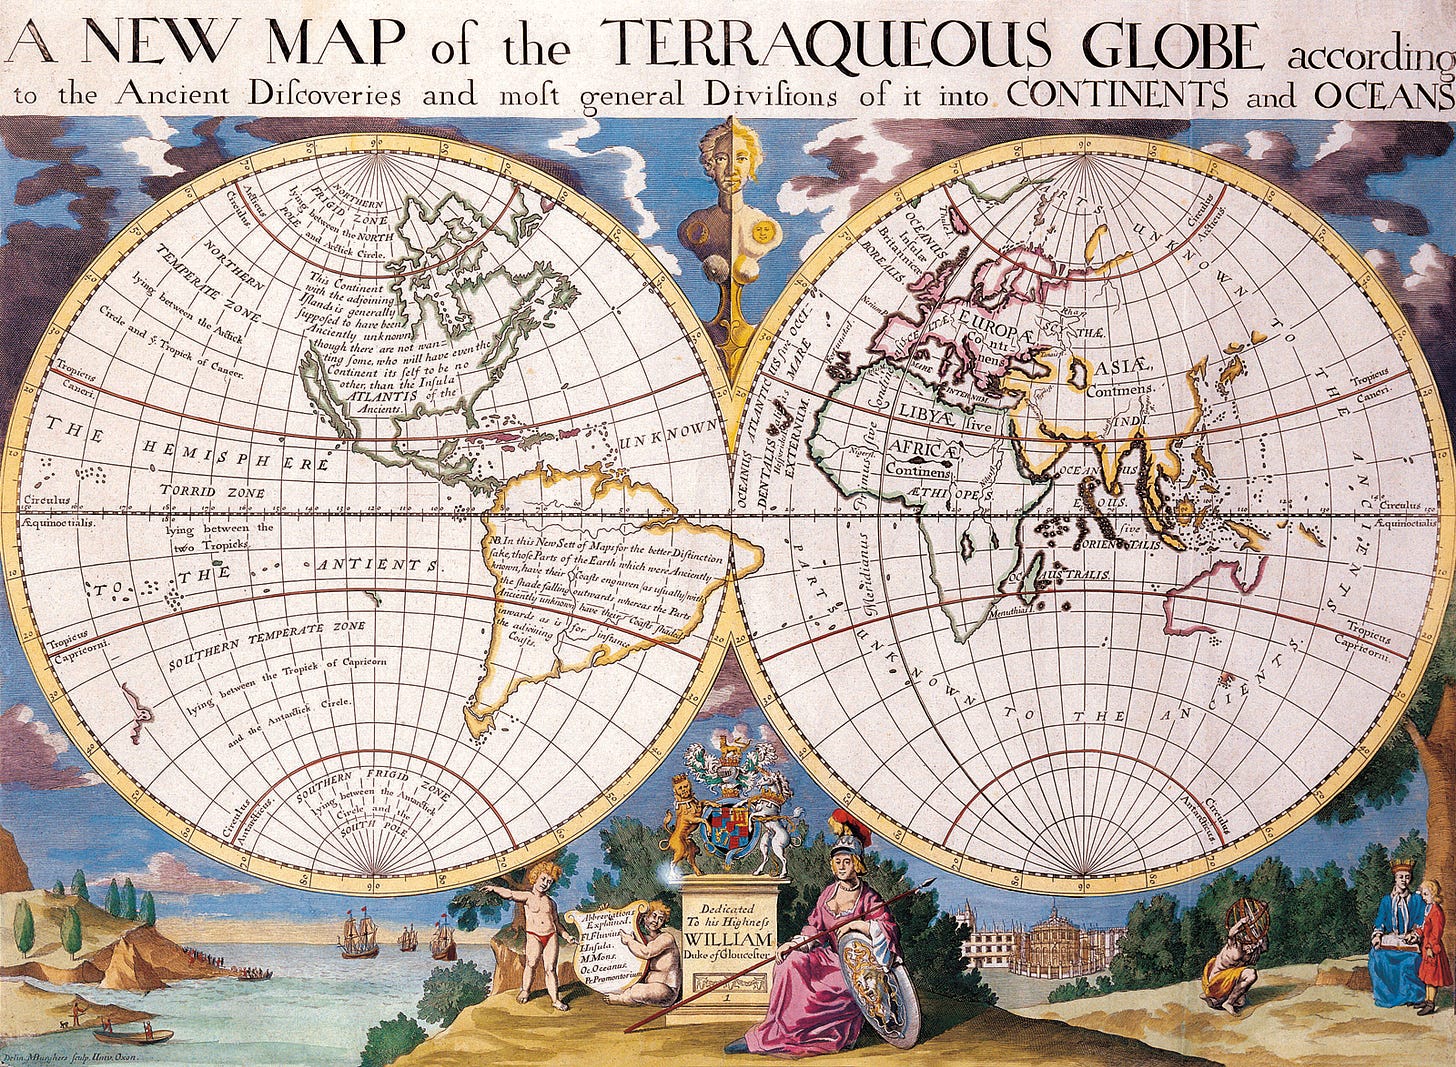 File:Antique World Map of Continents and Oceans 1700.png - Wikimedia Commons